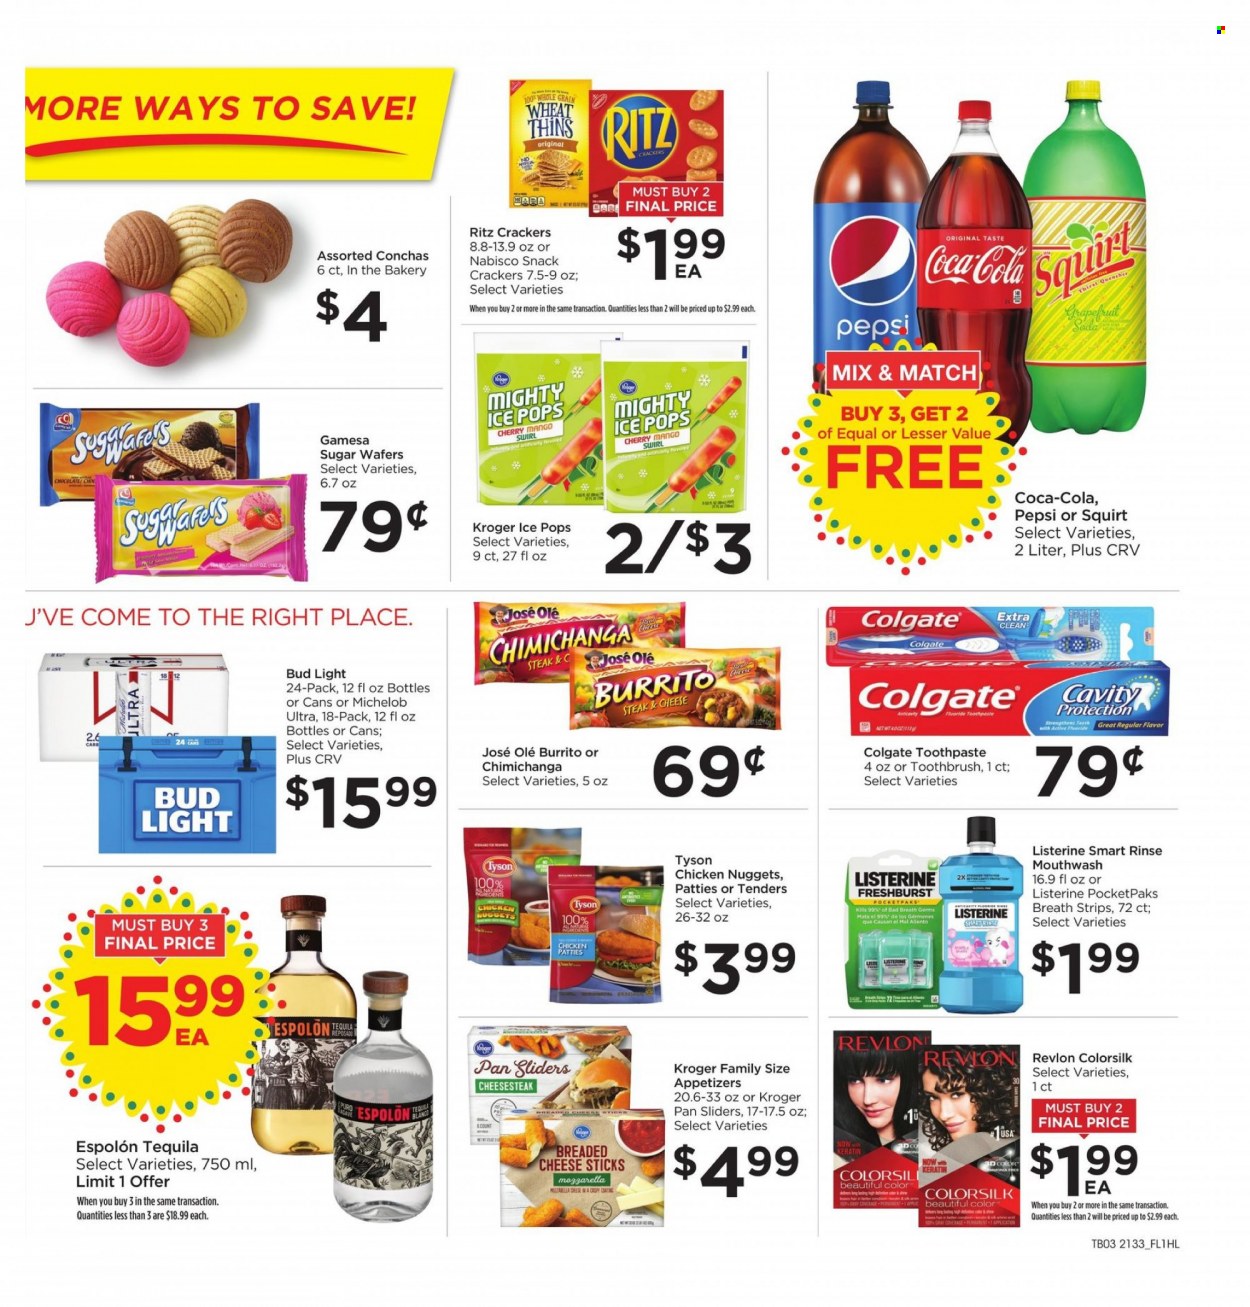 thumbnail - Food 4 Less Flyer - 09/15/2021 - 09/21/2021 - Sales products - mango, cherries, nuggets, chicken nuggets, burrito, mozzarella, cheese, strips, chicken patties, cheese sticks, wafers, chocolate, snack, crackers, RITZ, Thins, Coca-Cola, Pepsi, tequila, beer, Bud Light, steak, Colgate, Listerine, toothbrush, toothpaste, mouthwash, Revlon, keratin, pan, Michelob. Page 3.